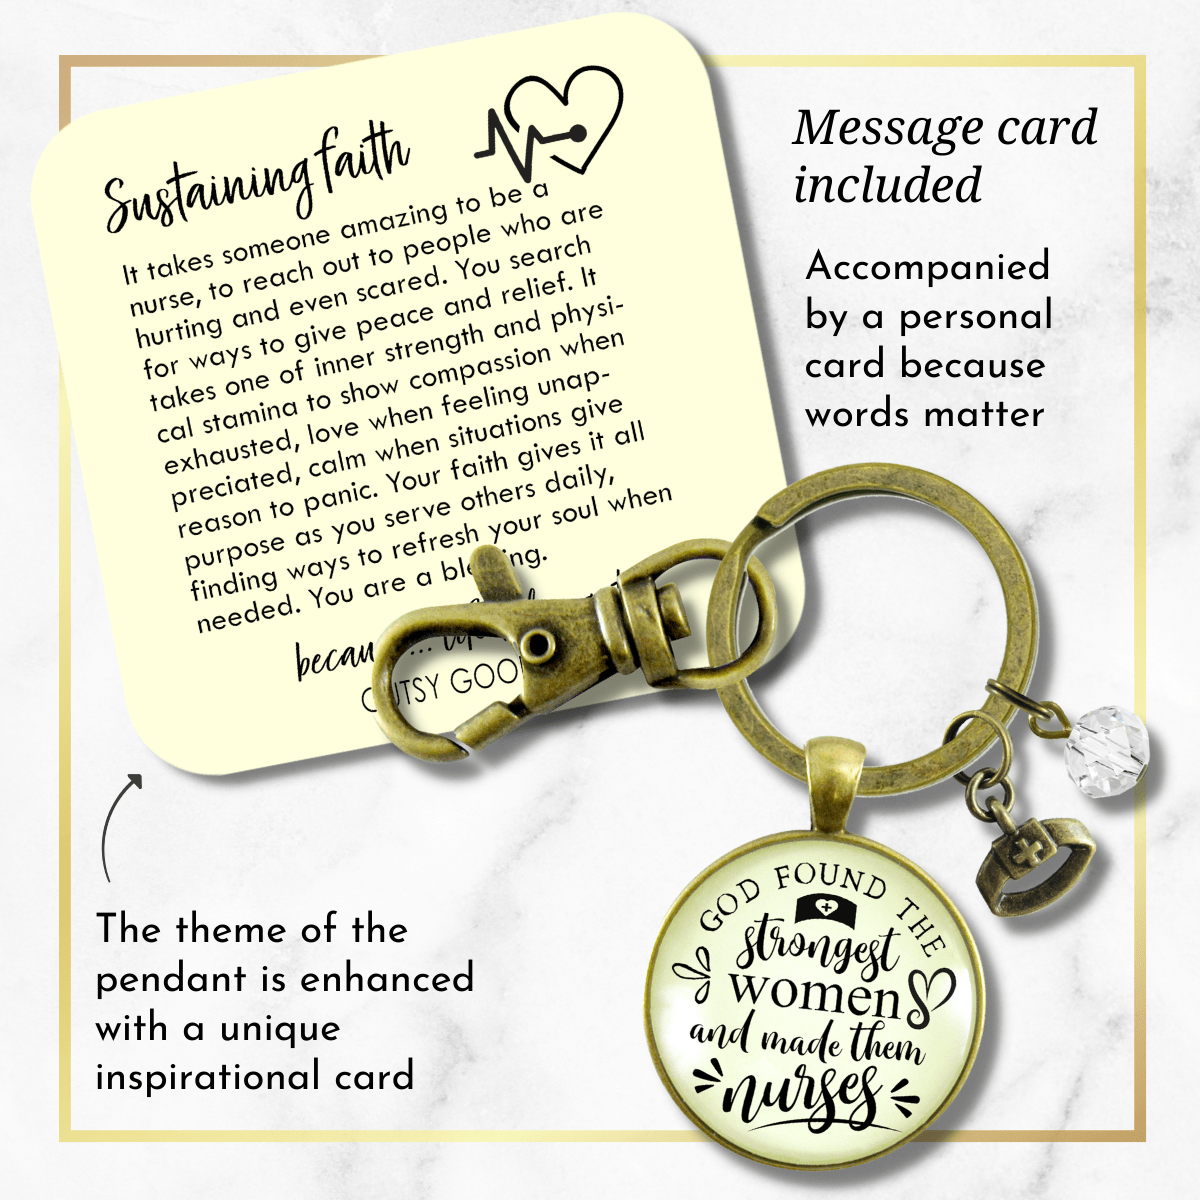 Mother In Law Keychain Friendship Is Great Blessing Gift Meaningful New Mom Wedding Jewelry Heart - Gutsy Goodness